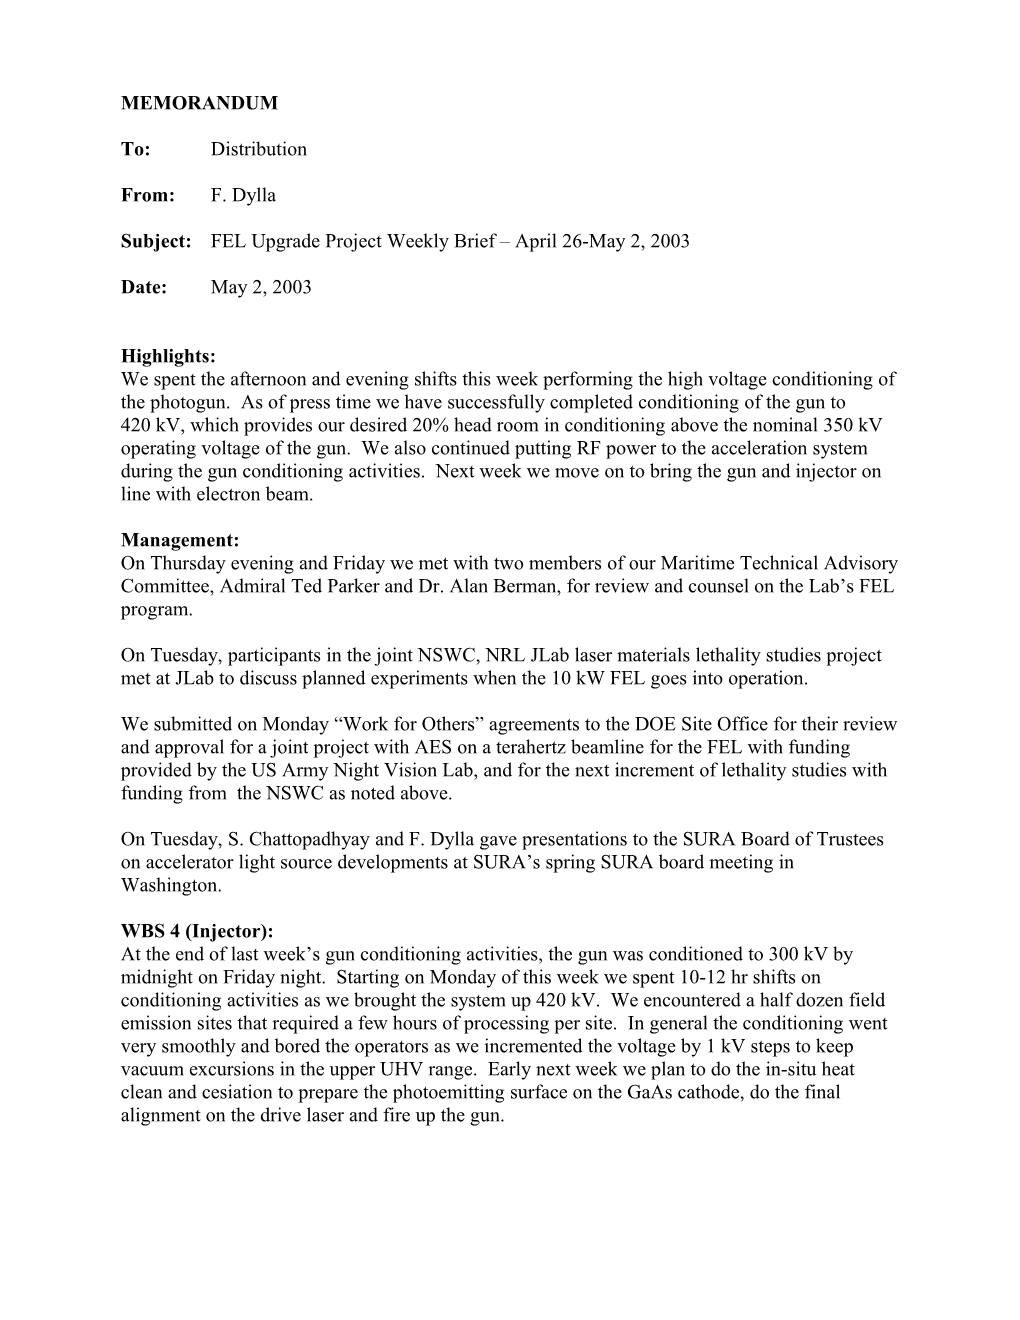 Subject: FEL Upgrade Project Weekly Brief April 26-May 2, 2003